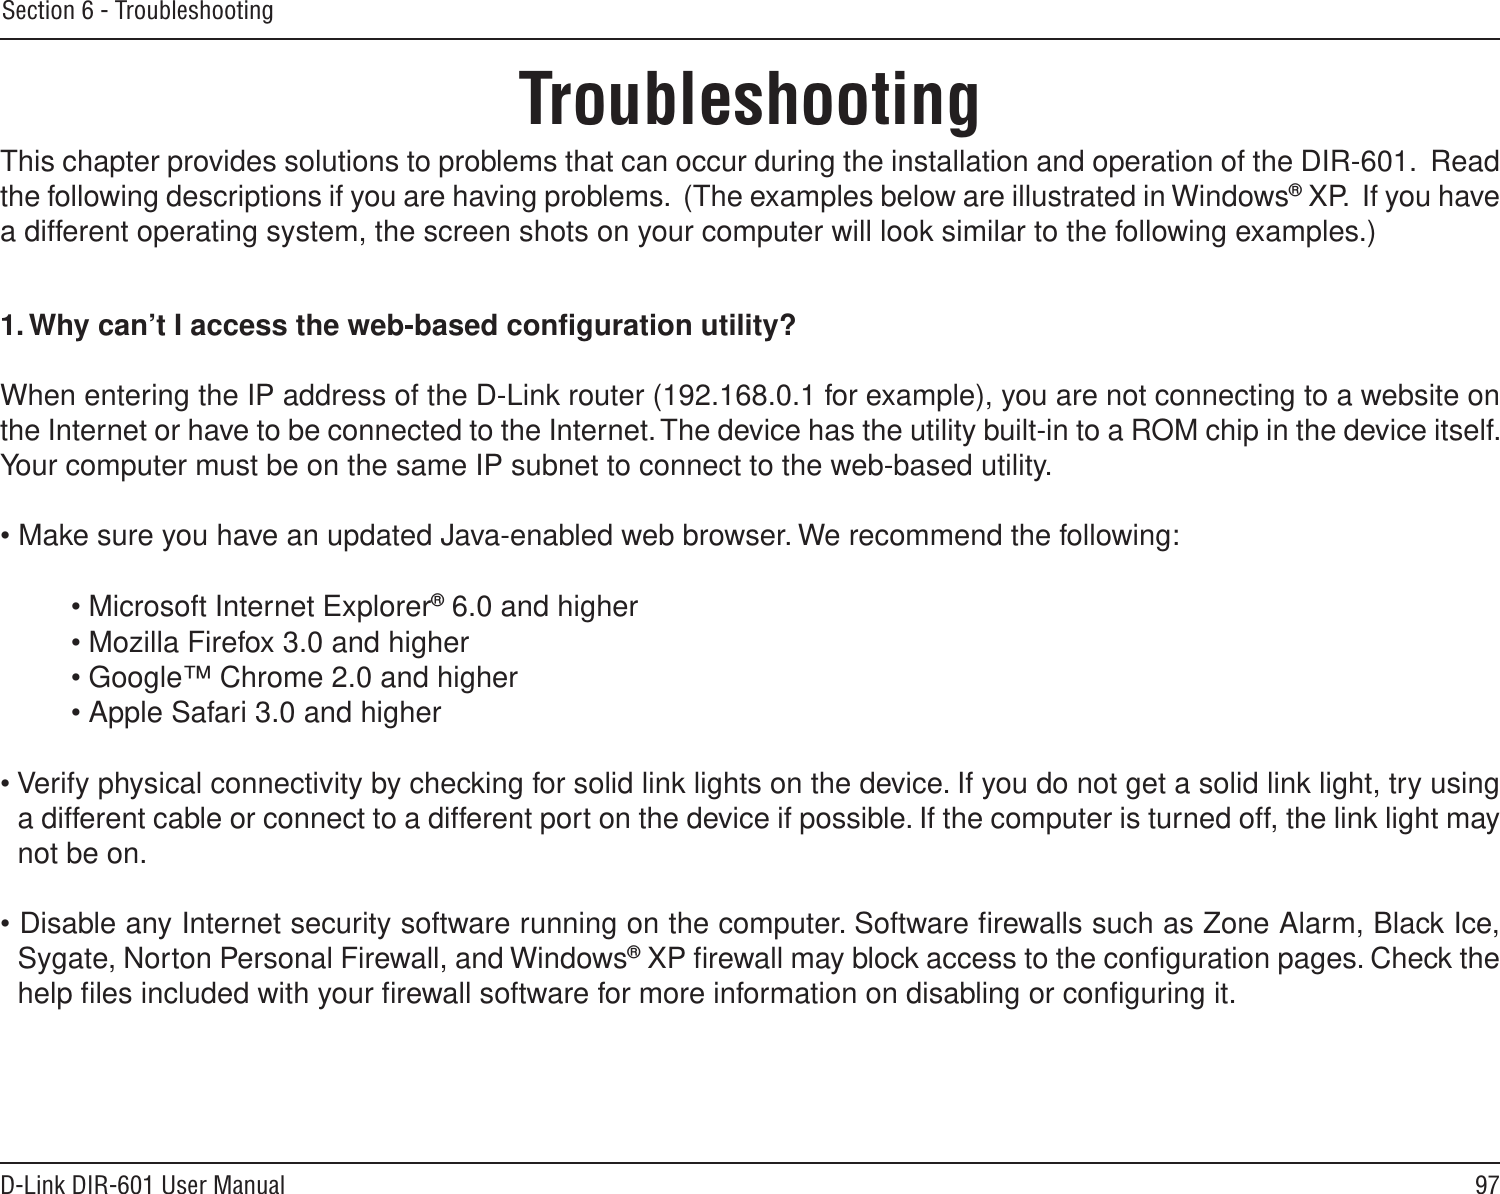 97D-Link DIR-601 User ManualSection 6 - TroubleshootingTroubleshootingThis chapter provides solutions to problems that can occur during the installation and operation of the DIR-601.  Read the following descriptions if you are having problems.  (The examples below are illustrated in Windows® XP.  If you have a different operating system, the screen shots on your computer will look similar to the following examples.)1. Why can’t I access the web-based conﬁguration utility?When entering the IP address of the D-Link router (192.168.0.1 for example), you are not connecting to a website on the Internet or have to be connected to the Internet. The device has the utility built-in to a ROM chip in the device itself. Your computer must be on the same IP subnet to connect to the web-based utility. • Make sure you have an updated Java-enabled web browser. We recommend the following: • Microsoft Internet Explorer® 6.0 and higher• Mozilla Firefox 3.0 and higher• Google™ Chrome 2.0 and higher• Apple Safari 3.0 and higher• Verify physical connectivity by checking for solid link lights on the device. If you do not get a solid link light, try using a different cable or connect to a different port on the device if possible. If the computer is turned off, the link light may not be on.• Disable any Internet security software running on the computer. Software ﬁrewalls such as Zone Alarm, Black Ice, Sygate, Norton Personal Firewall, and Windows® XP ﬁrewall may block access to the conﬁguration pages. Check the help ﬁles included with your ﬁrewall software for more information on disabling or conﬁguring it.